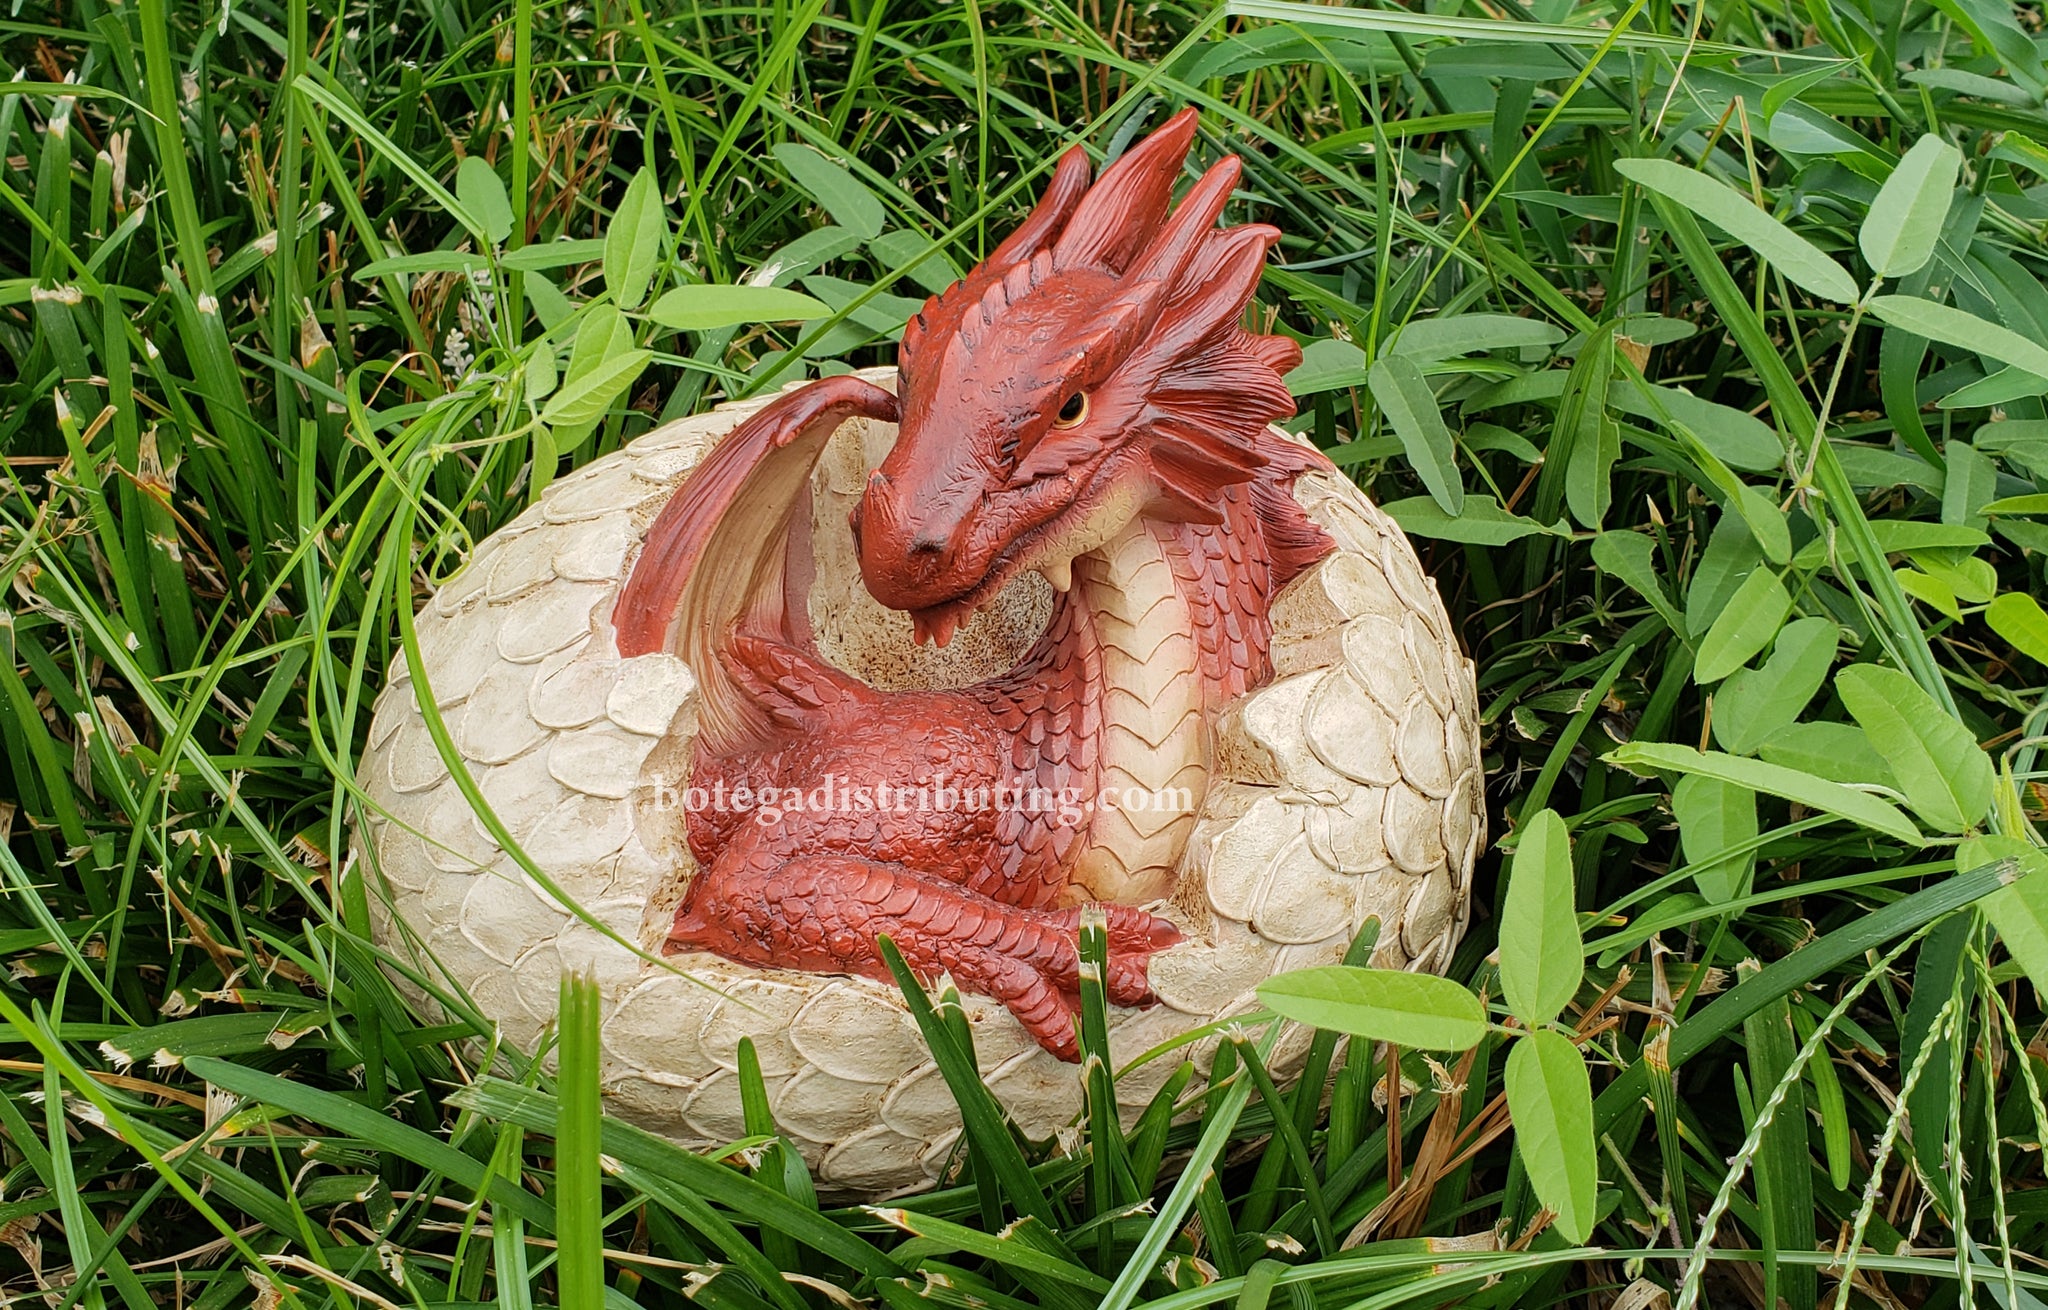 Large Red Baby Dragon Hatchling In Egg Statue 9.5" Long Dragon Scales Egg Shell